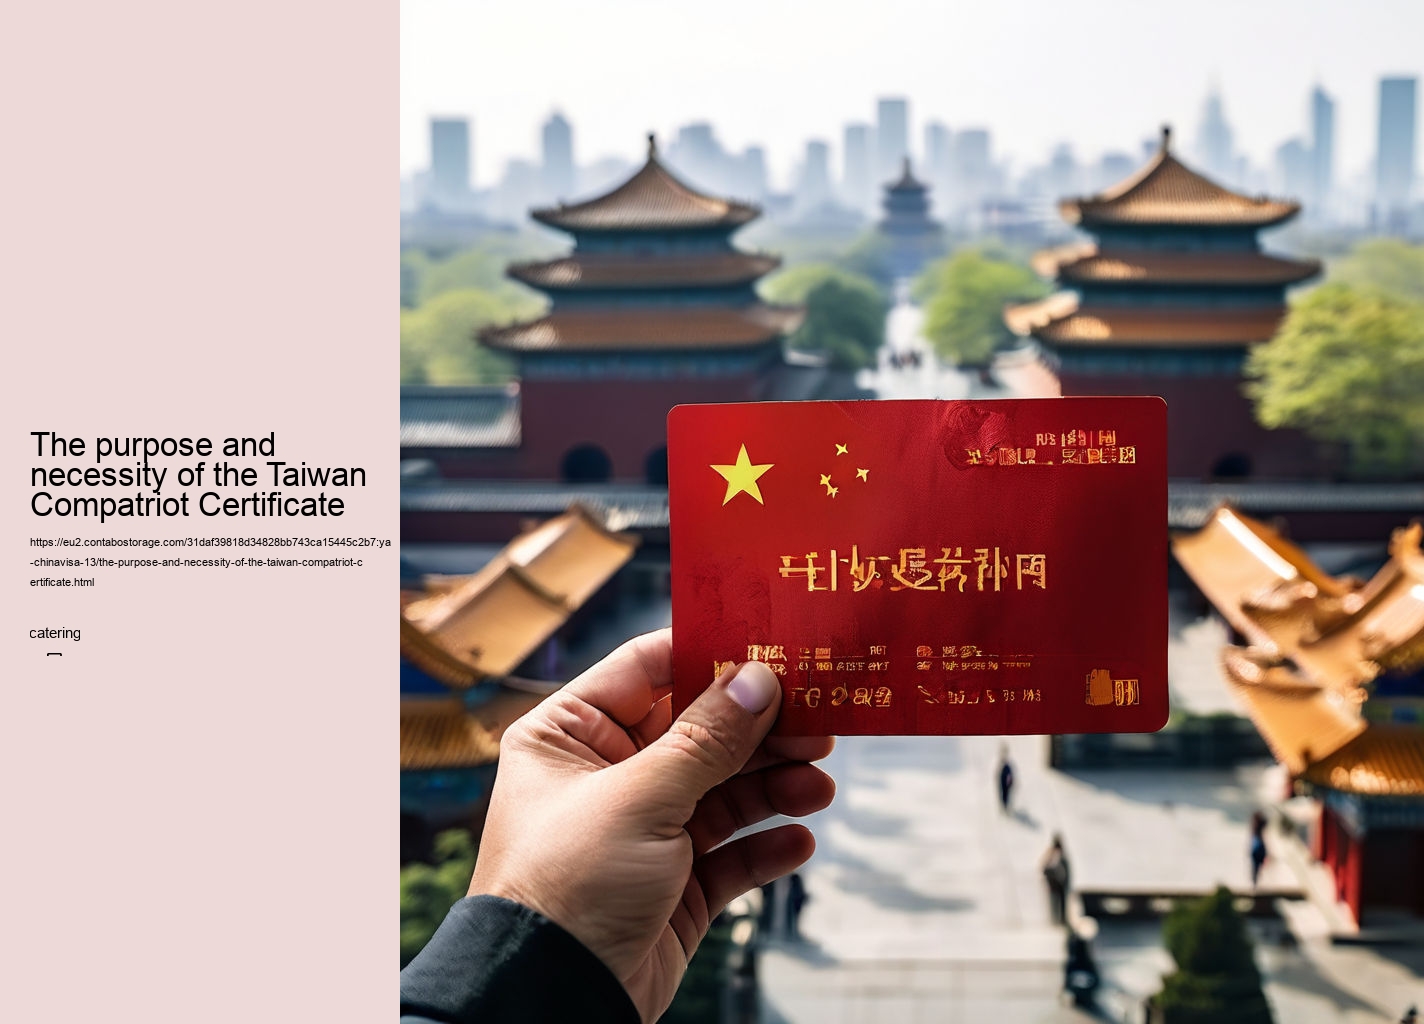 The purpose and necessity of the Taiwan Compatriot Certificate